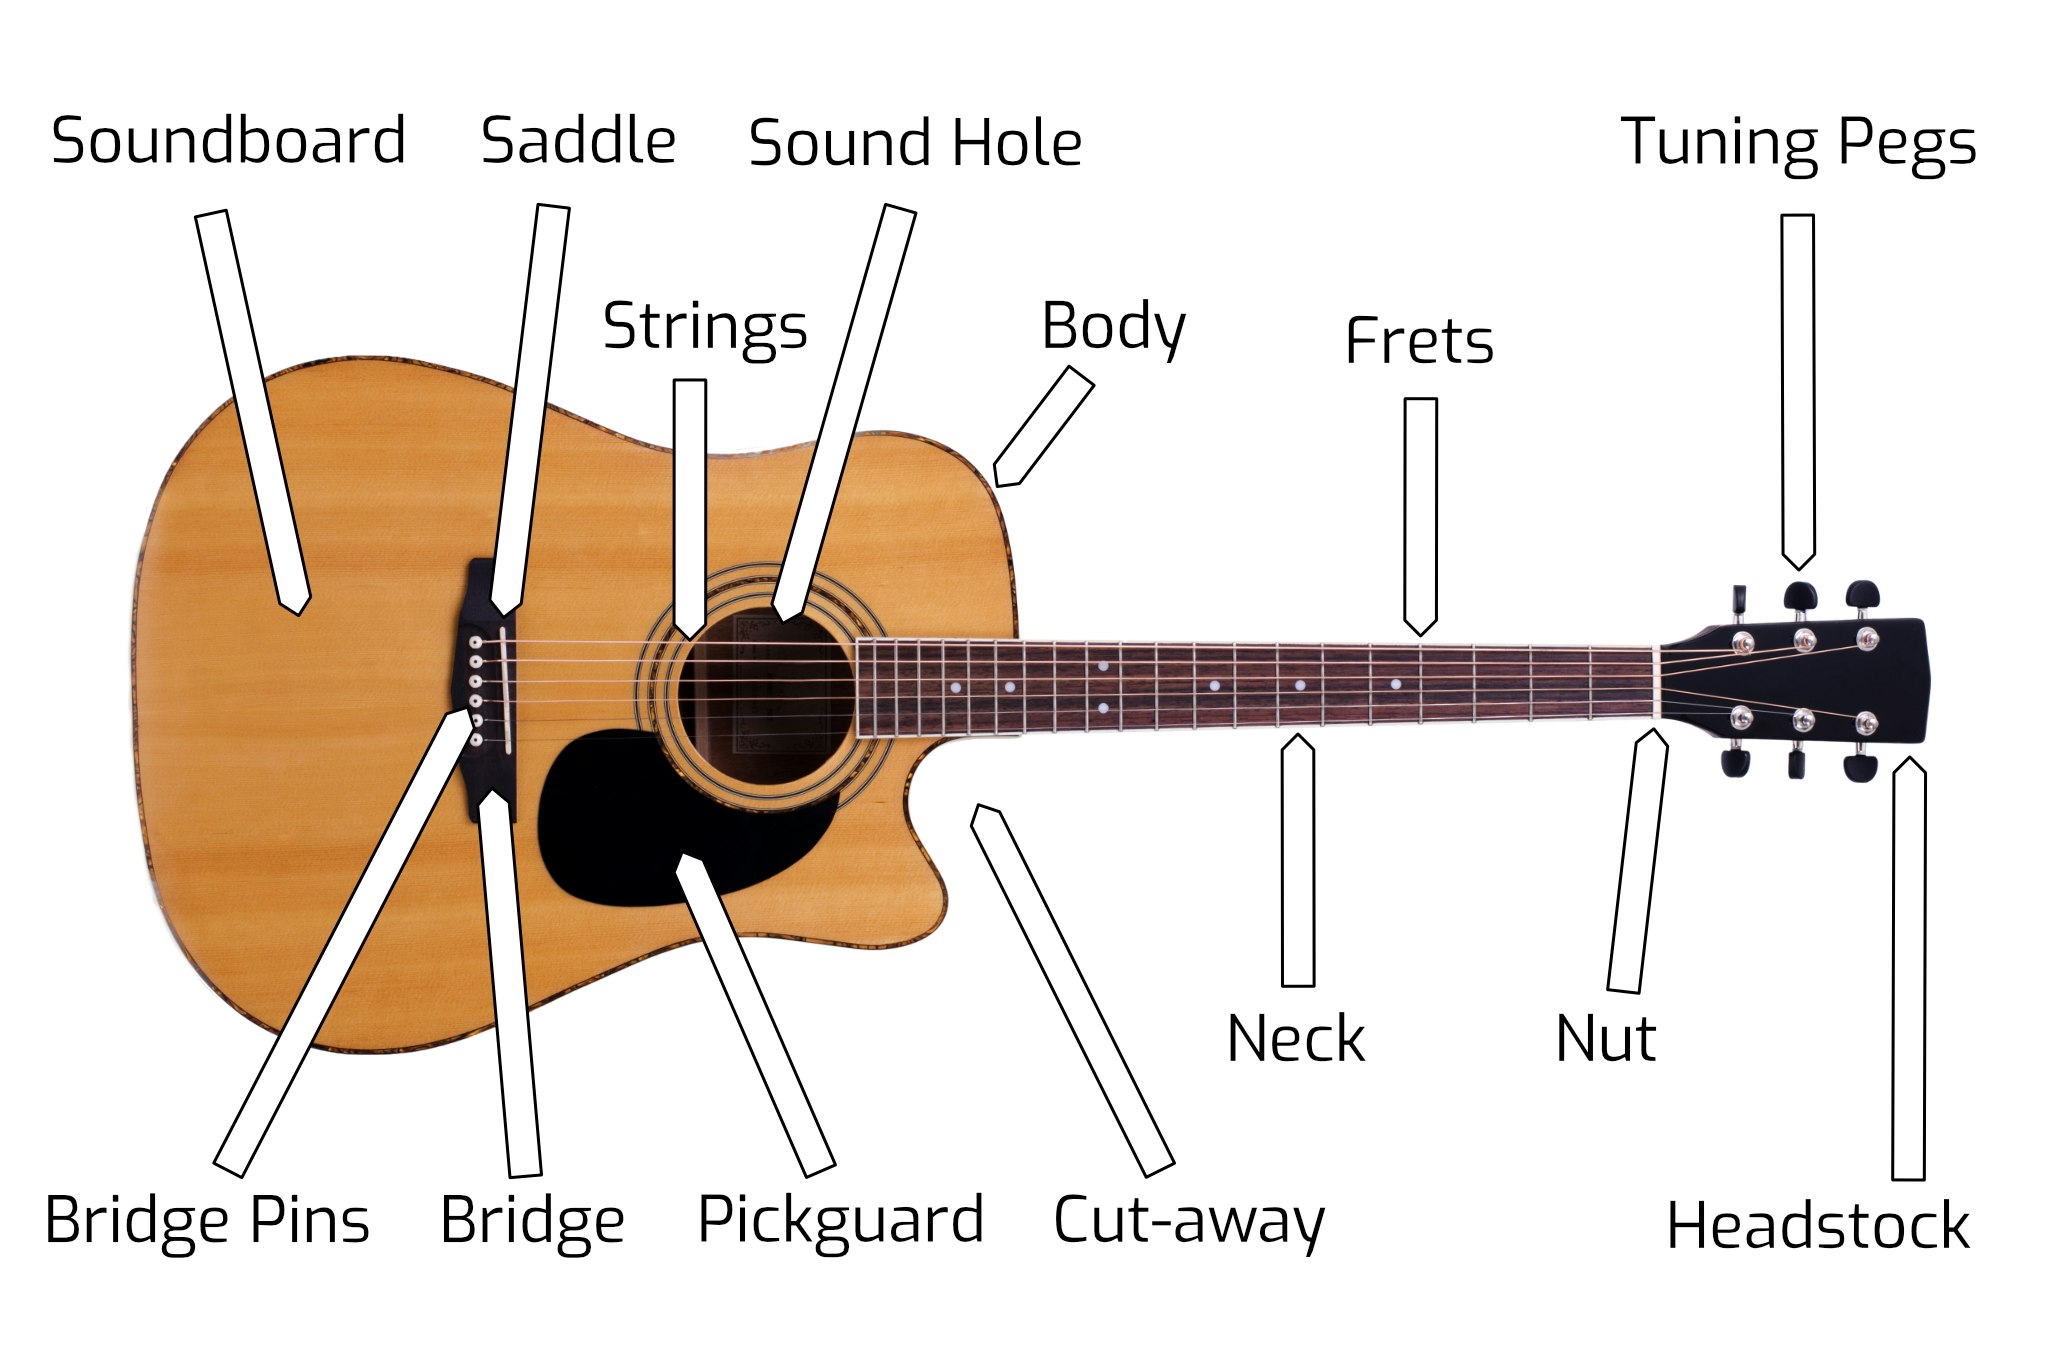 Anatomy of a Steel String Acoustic Guitar